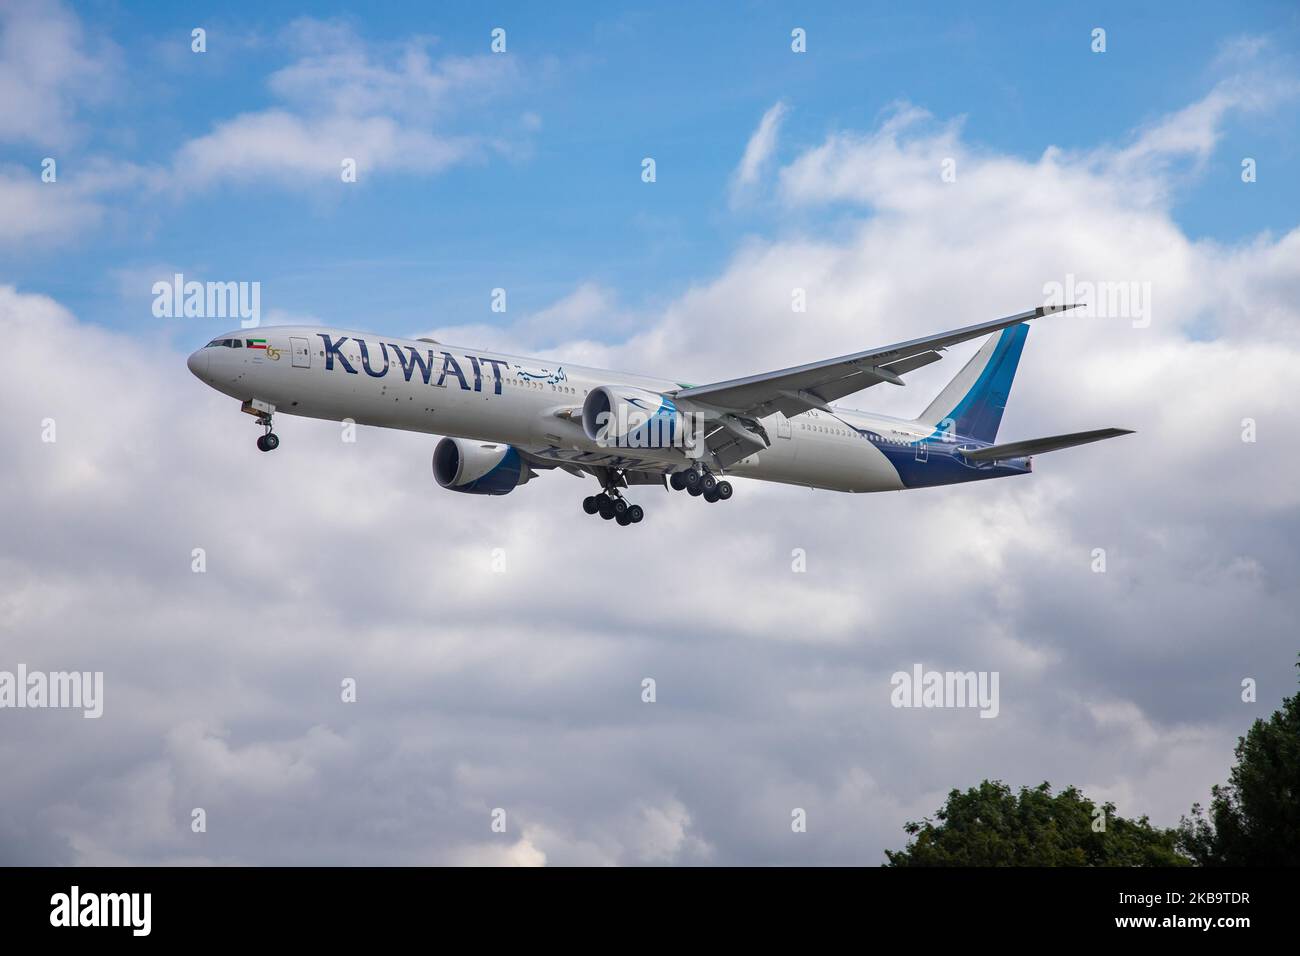 Kuwait Airways Boeing 777-300 ER aircraft as seen on final approach landing at London Heathrow International Airport LHR EGLL over the houses of Myrtle Avenue on 29 October 2019. The long-haul wide-body Boeing 777 B773 airplane has the registration 9K-AOM, the name Dasman / ????? and is powered by 2x GE jet engines. Kuwait Airways KU KAC is the national airline carrier of Kuwait and connects the British capital to Kuwait Int. Airport KWI OKBK, Kuwait City. London Heathrow Airport, England, United Kingdom (Photo by Nicolas Economou/NurPhoto) Stock Photo